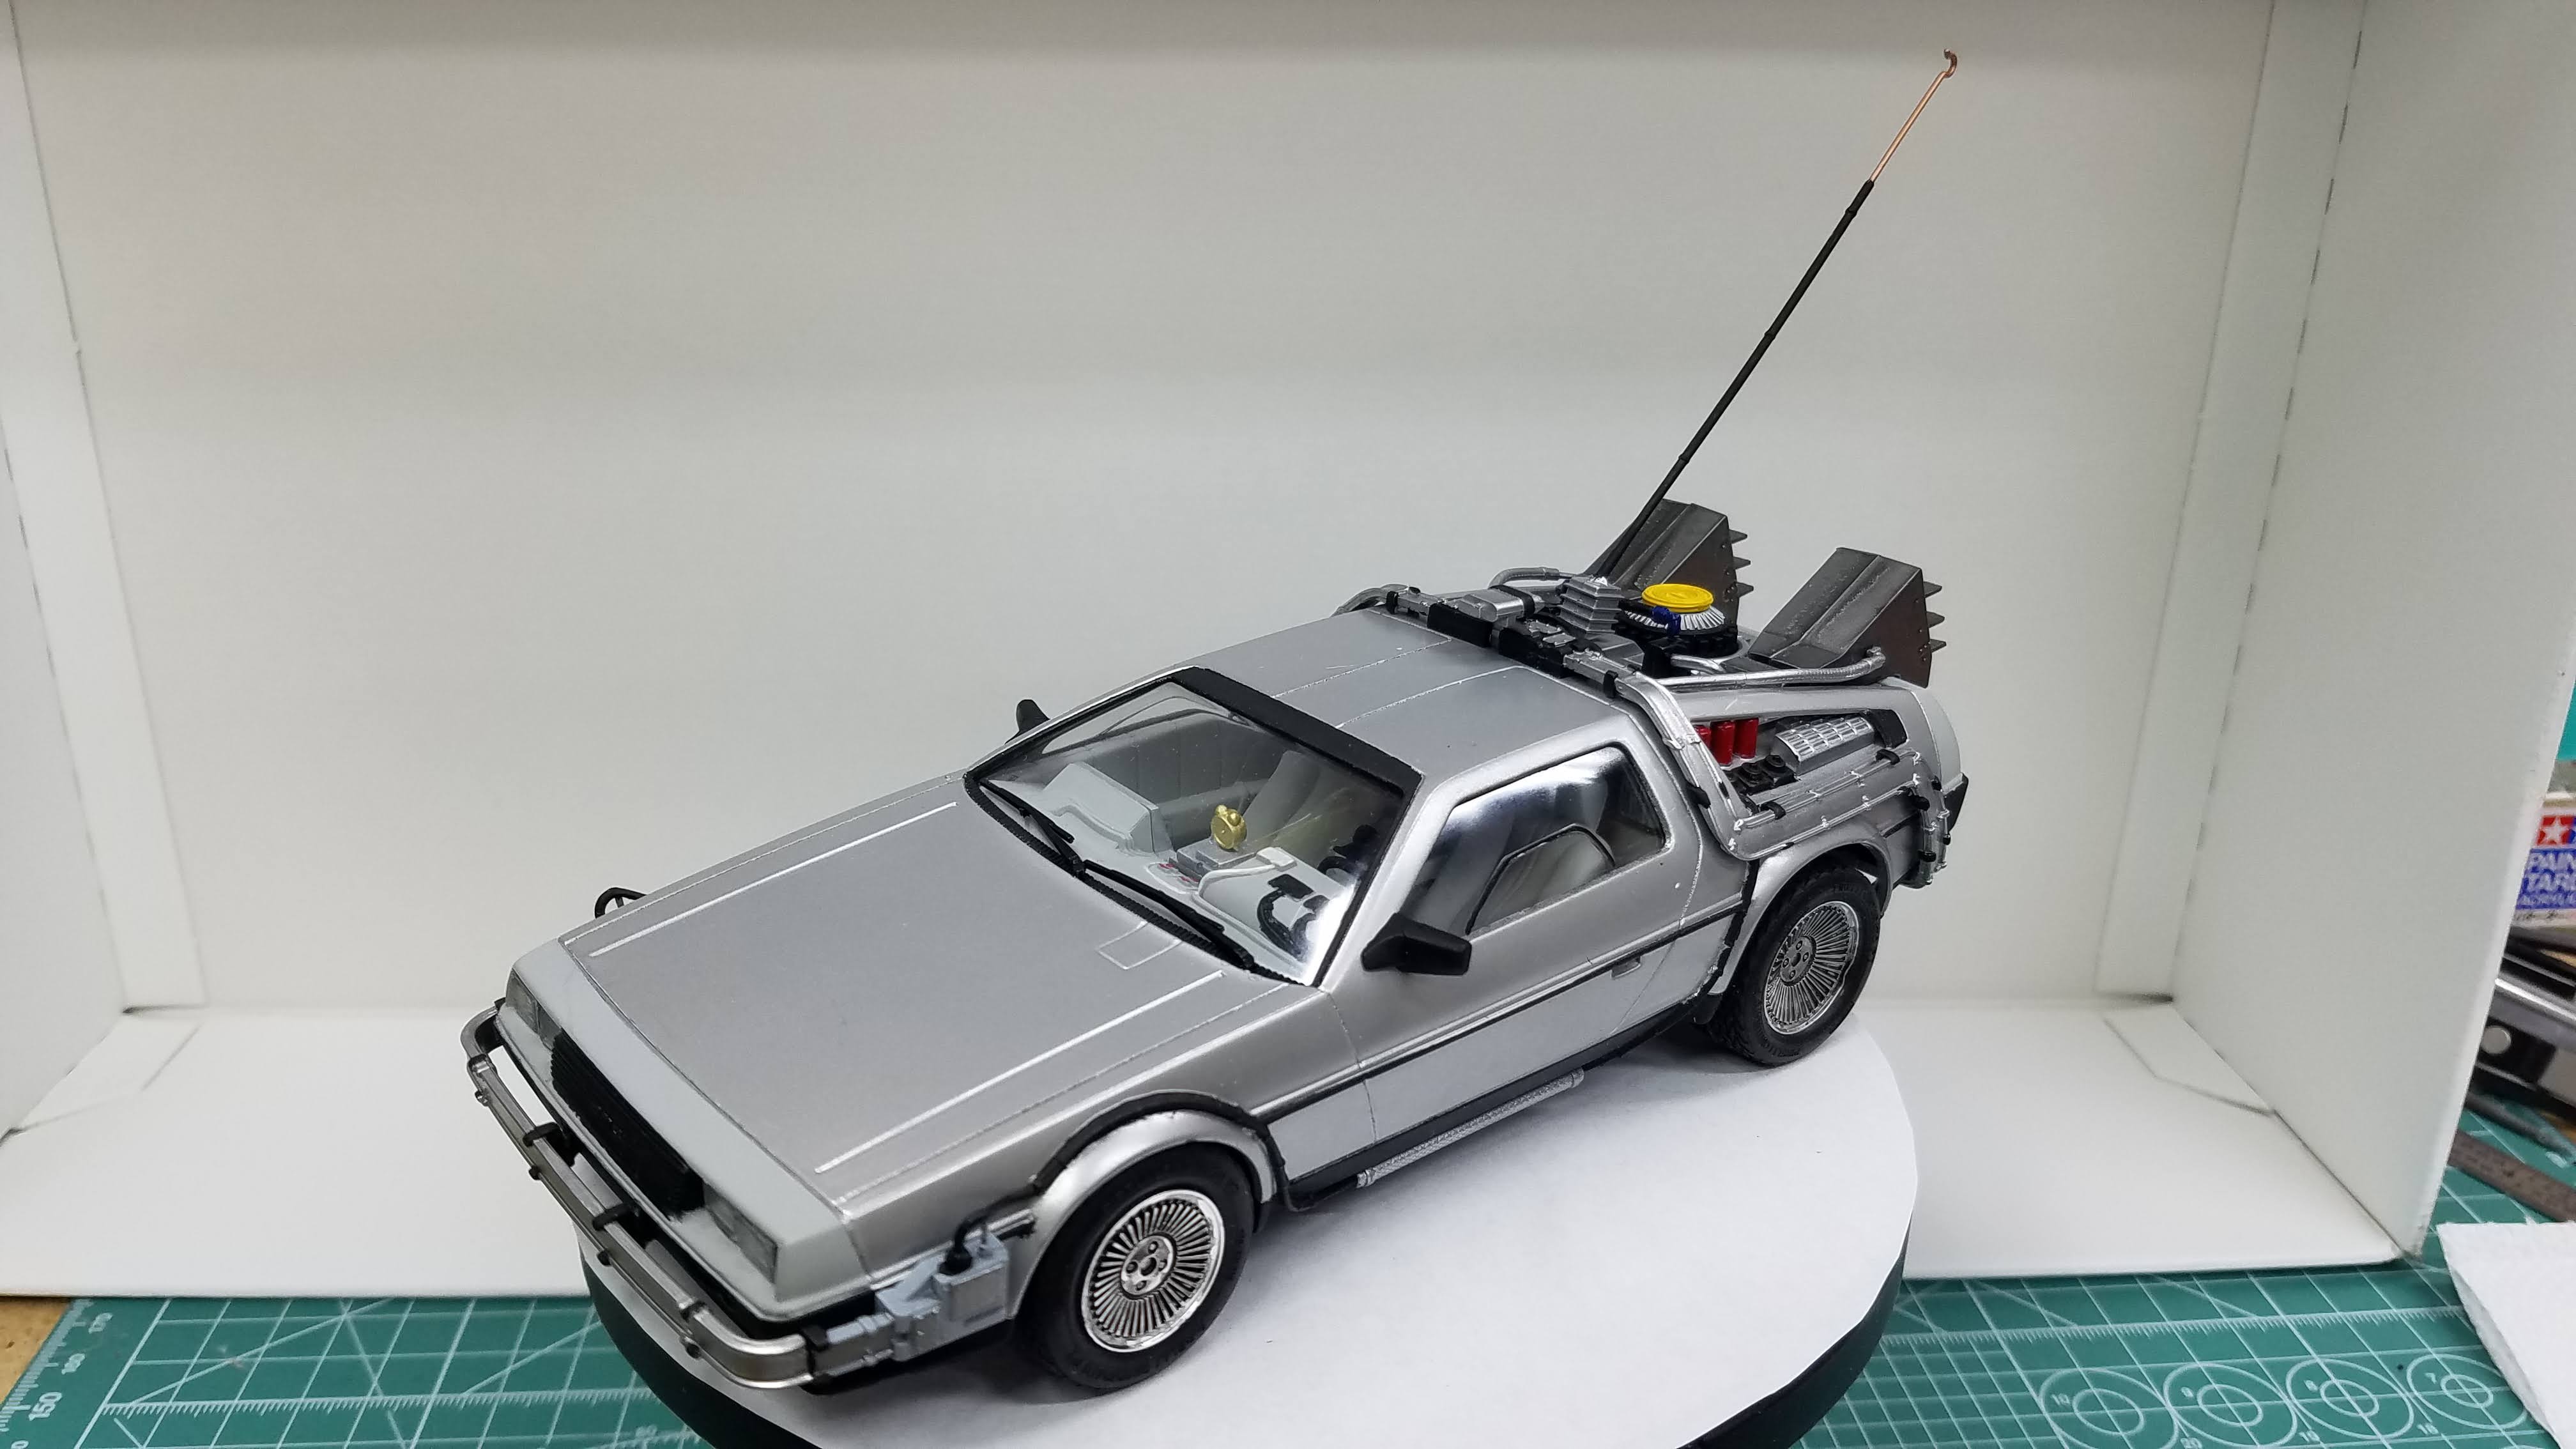 Finished Back to the Future DeLorean from the first film